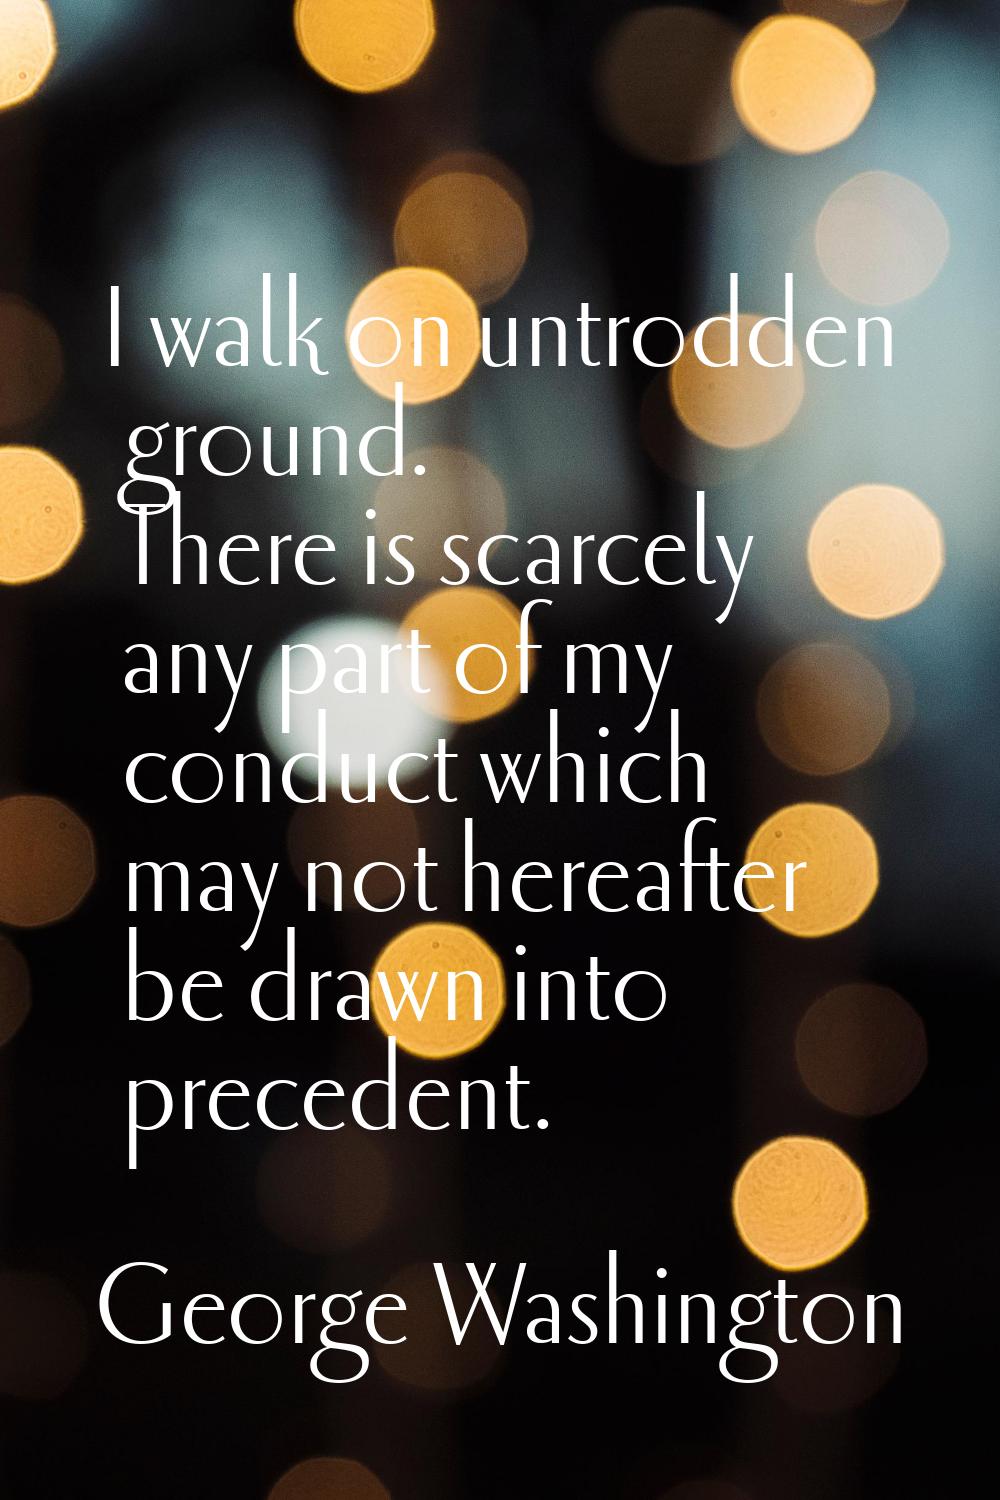 I walk on untrodden ground. There is scarcely any part of my conduct which may not hereafter be dra